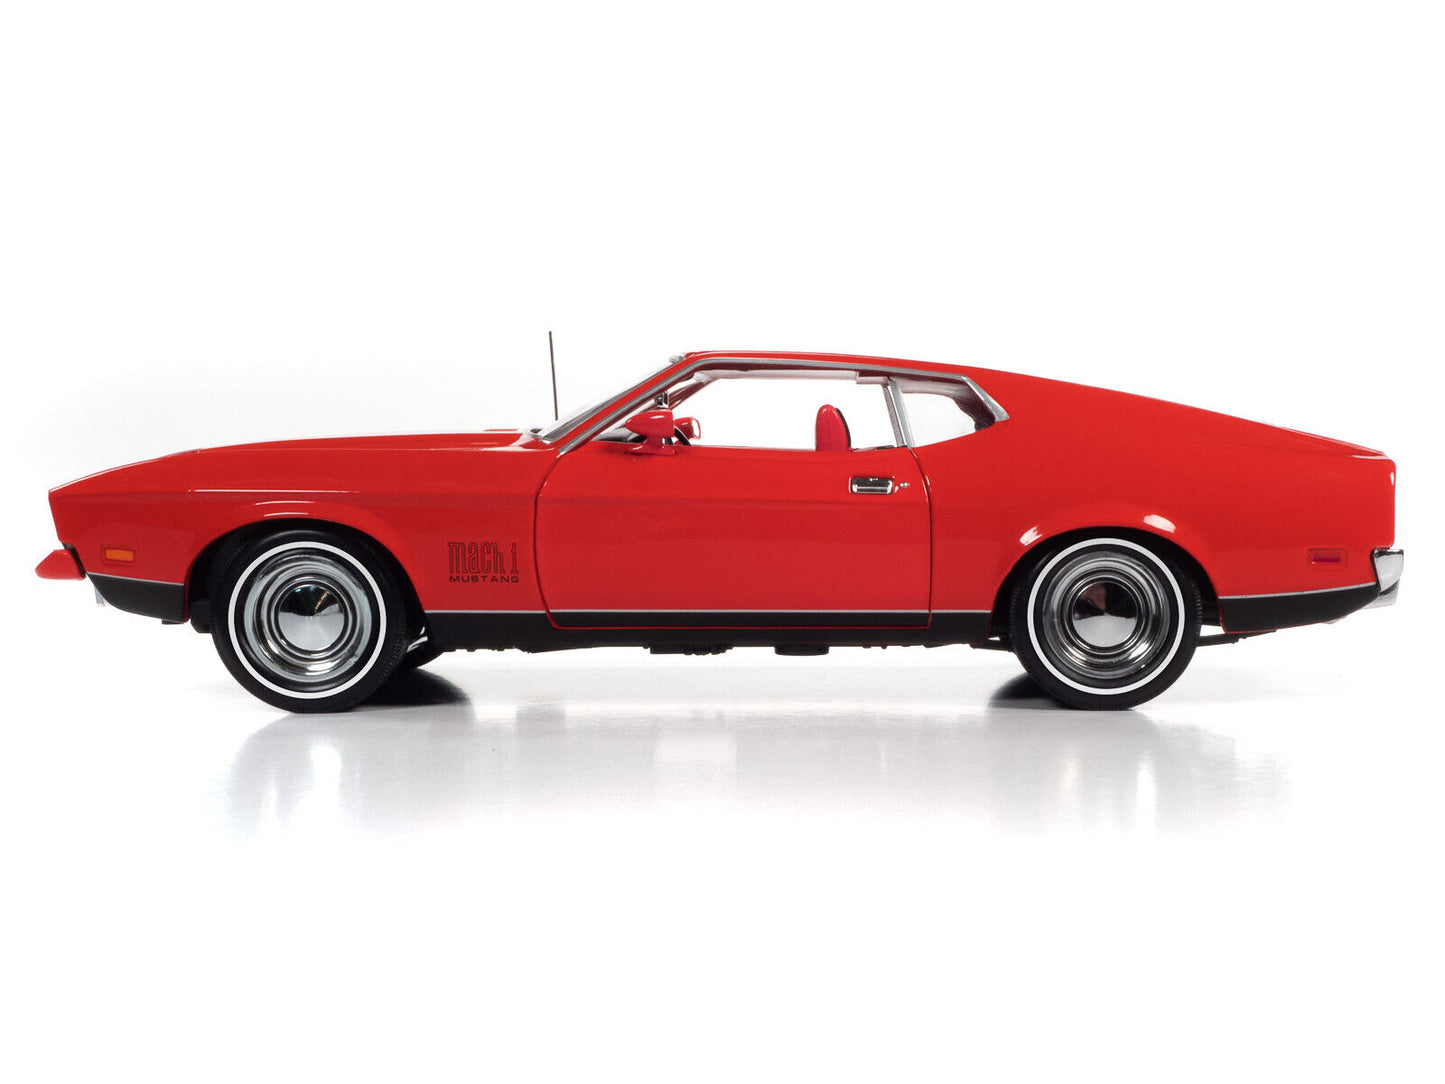 1971 Ford Mustang Mach 1 Bright Red with Red Interior (James Bond 007) "Diamonds are Forever" (1971) Movie 1/18 Diecast Model Car by Auto World